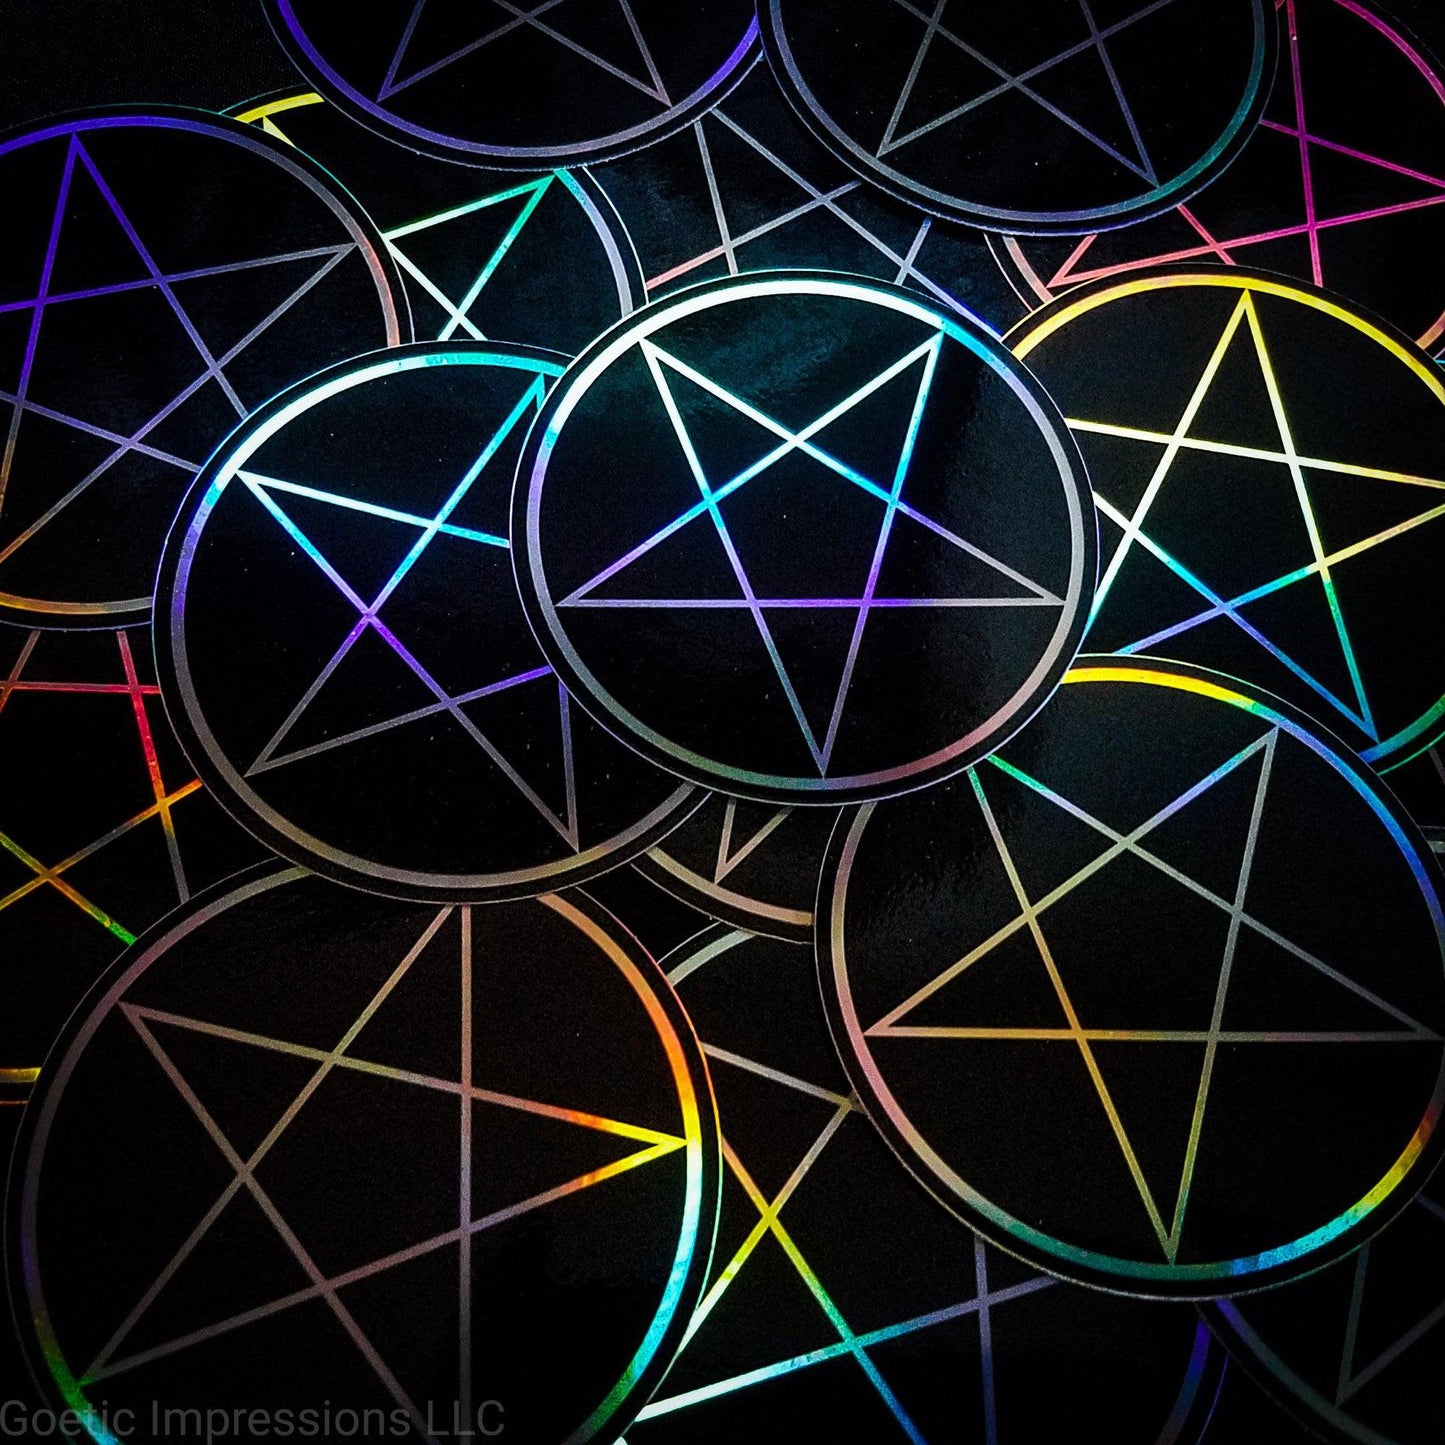 A pile of three inch circular holographic stickers. The stickers have a black background and a white symbol featuring the a traditional pentacle. The holographic paper shines in a wide arrange of rainbow colors when the light catches it at different angles. 